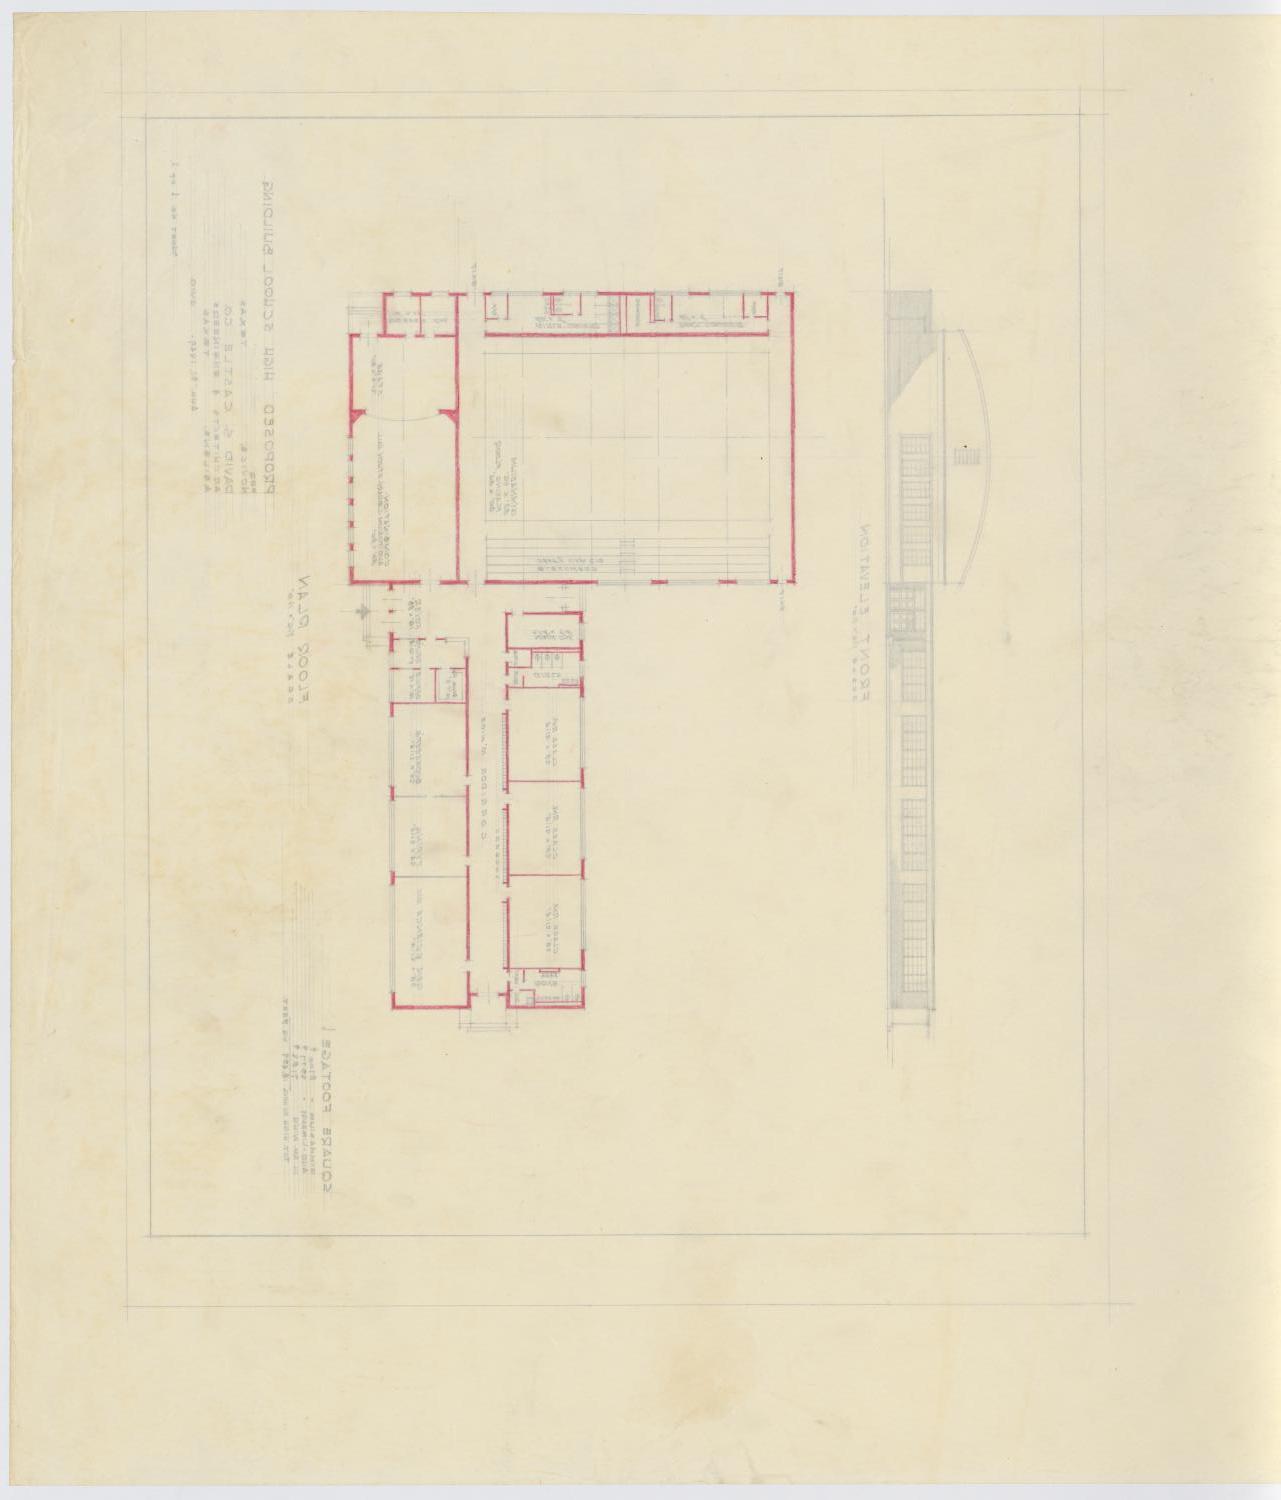 Proposed High School Building Novice, Texas: Floor Plan and Elevation
                                                
                                                    [Sequence #]: 2 of 2
                                                